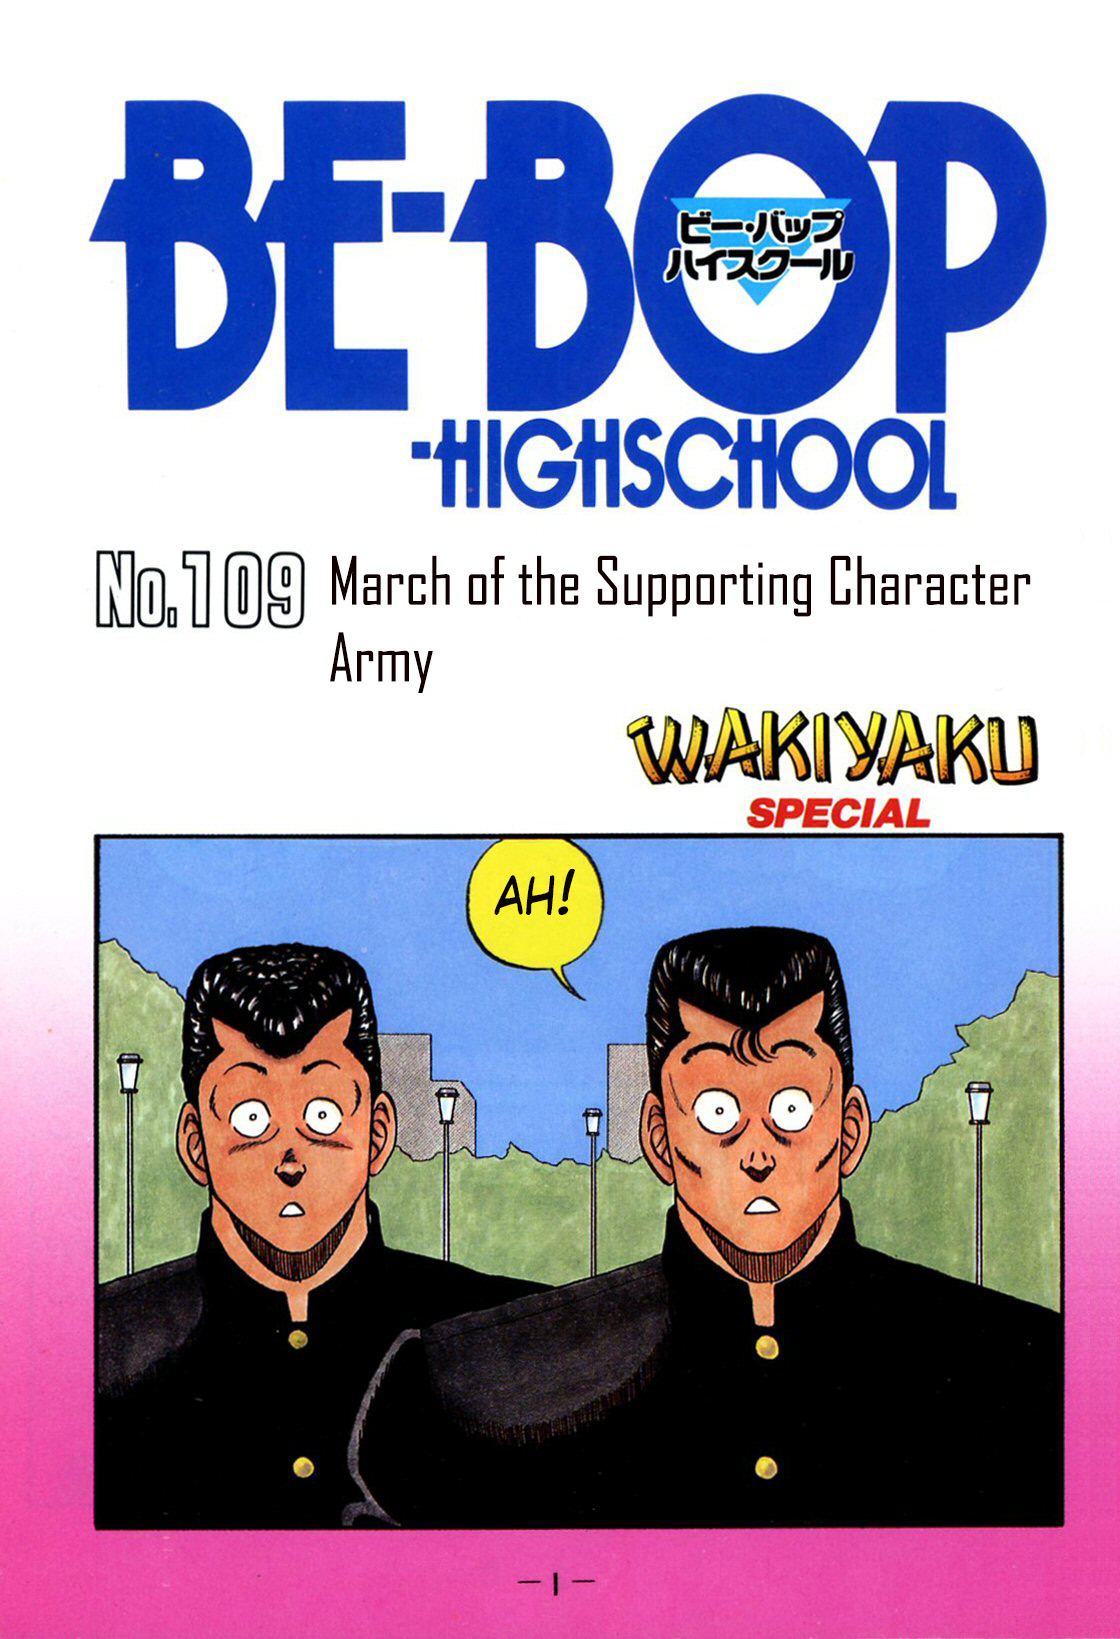 Be-Bop-Highschool Chapter 109: March Of The Supporting Character Army - Picture 3